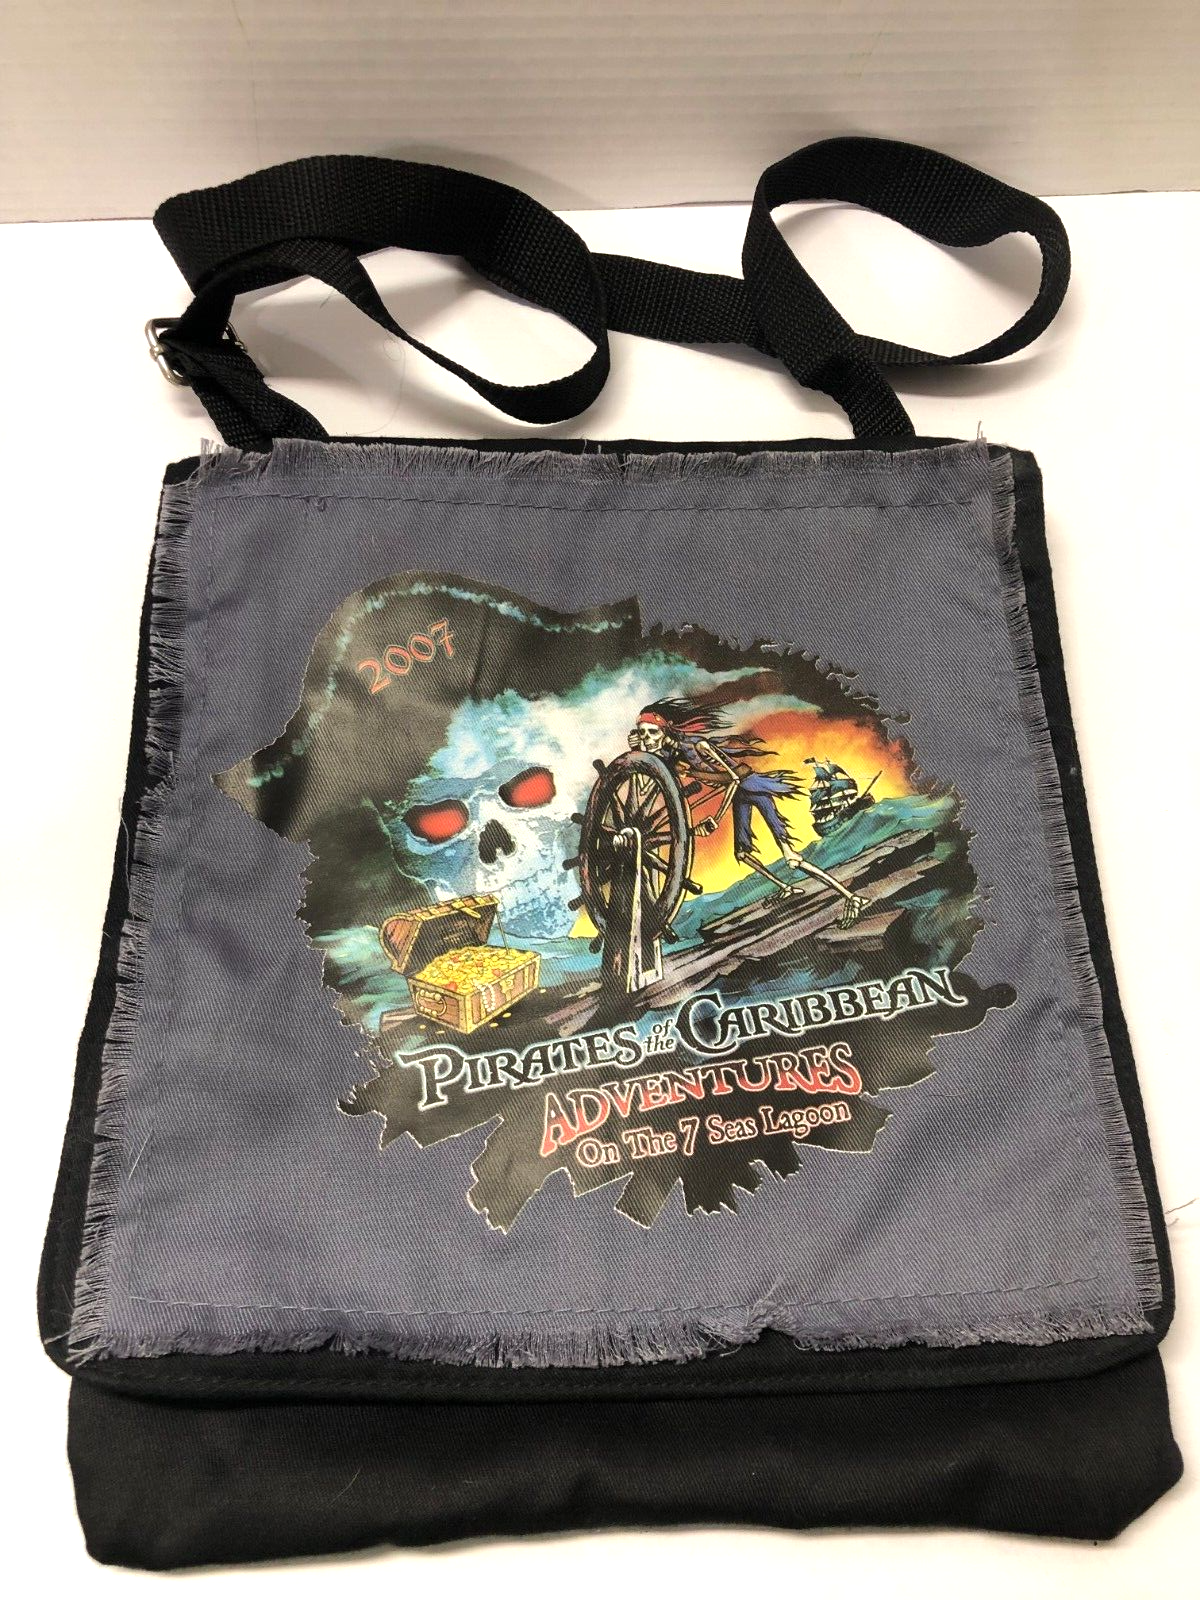 Disney Pirates of the Caribbean SPECIAL EVENT 2007 Tablet Bag Purse NEW - $19.80